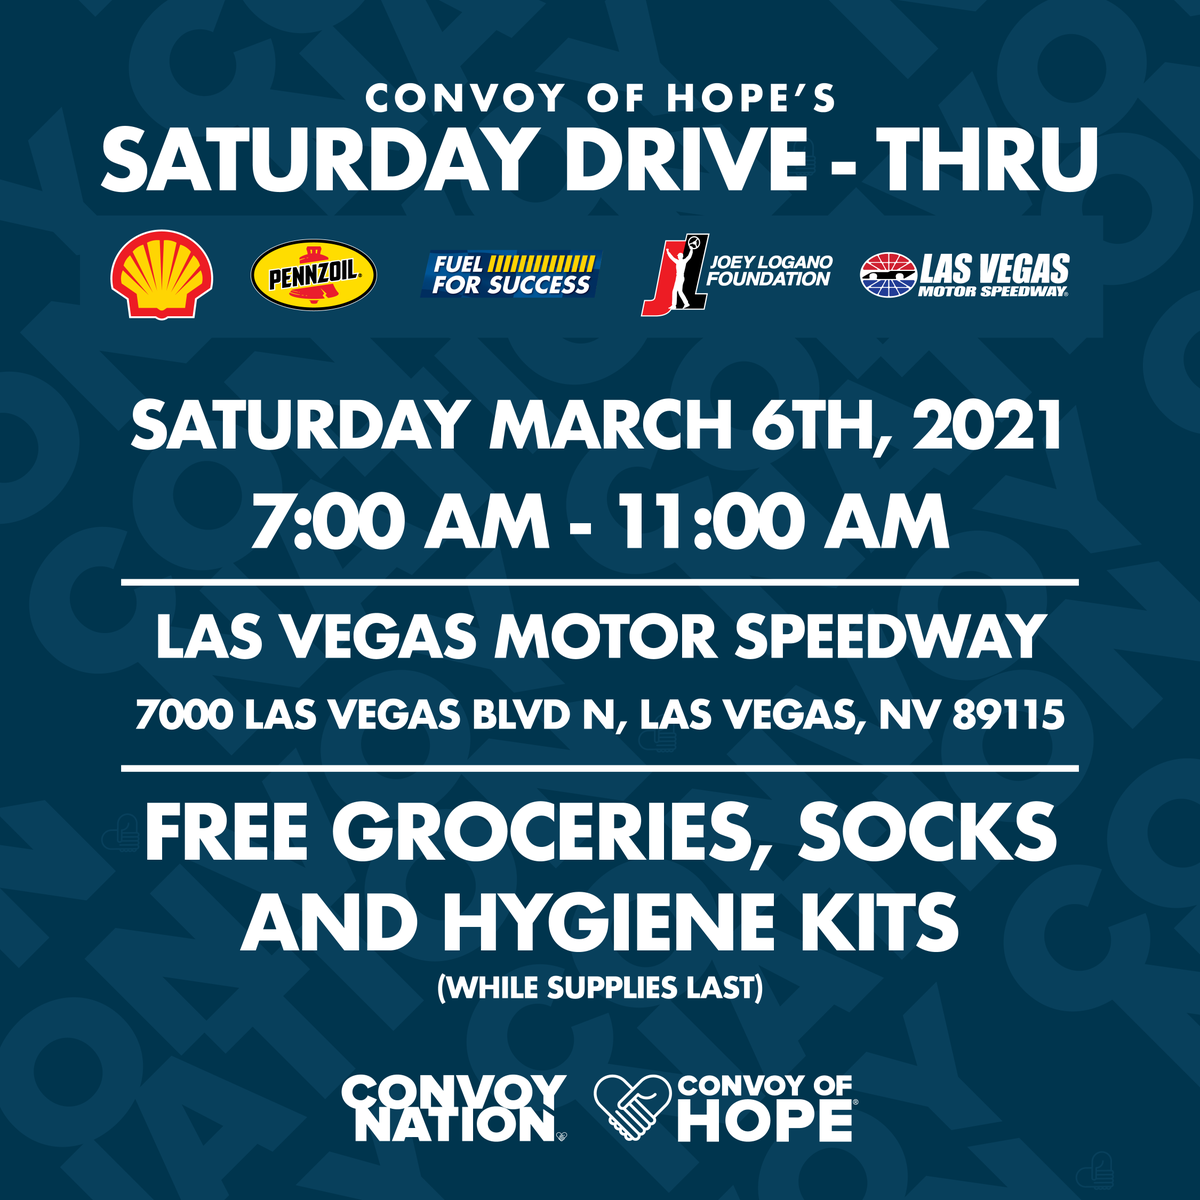 This Saturday is the Convoy Of Hope’s Drive-Thru! Help us get the word out by sharing this post!
#LasVegas #CASAVolunteers #CASALV #ConvoyOfHope #VegasChamber